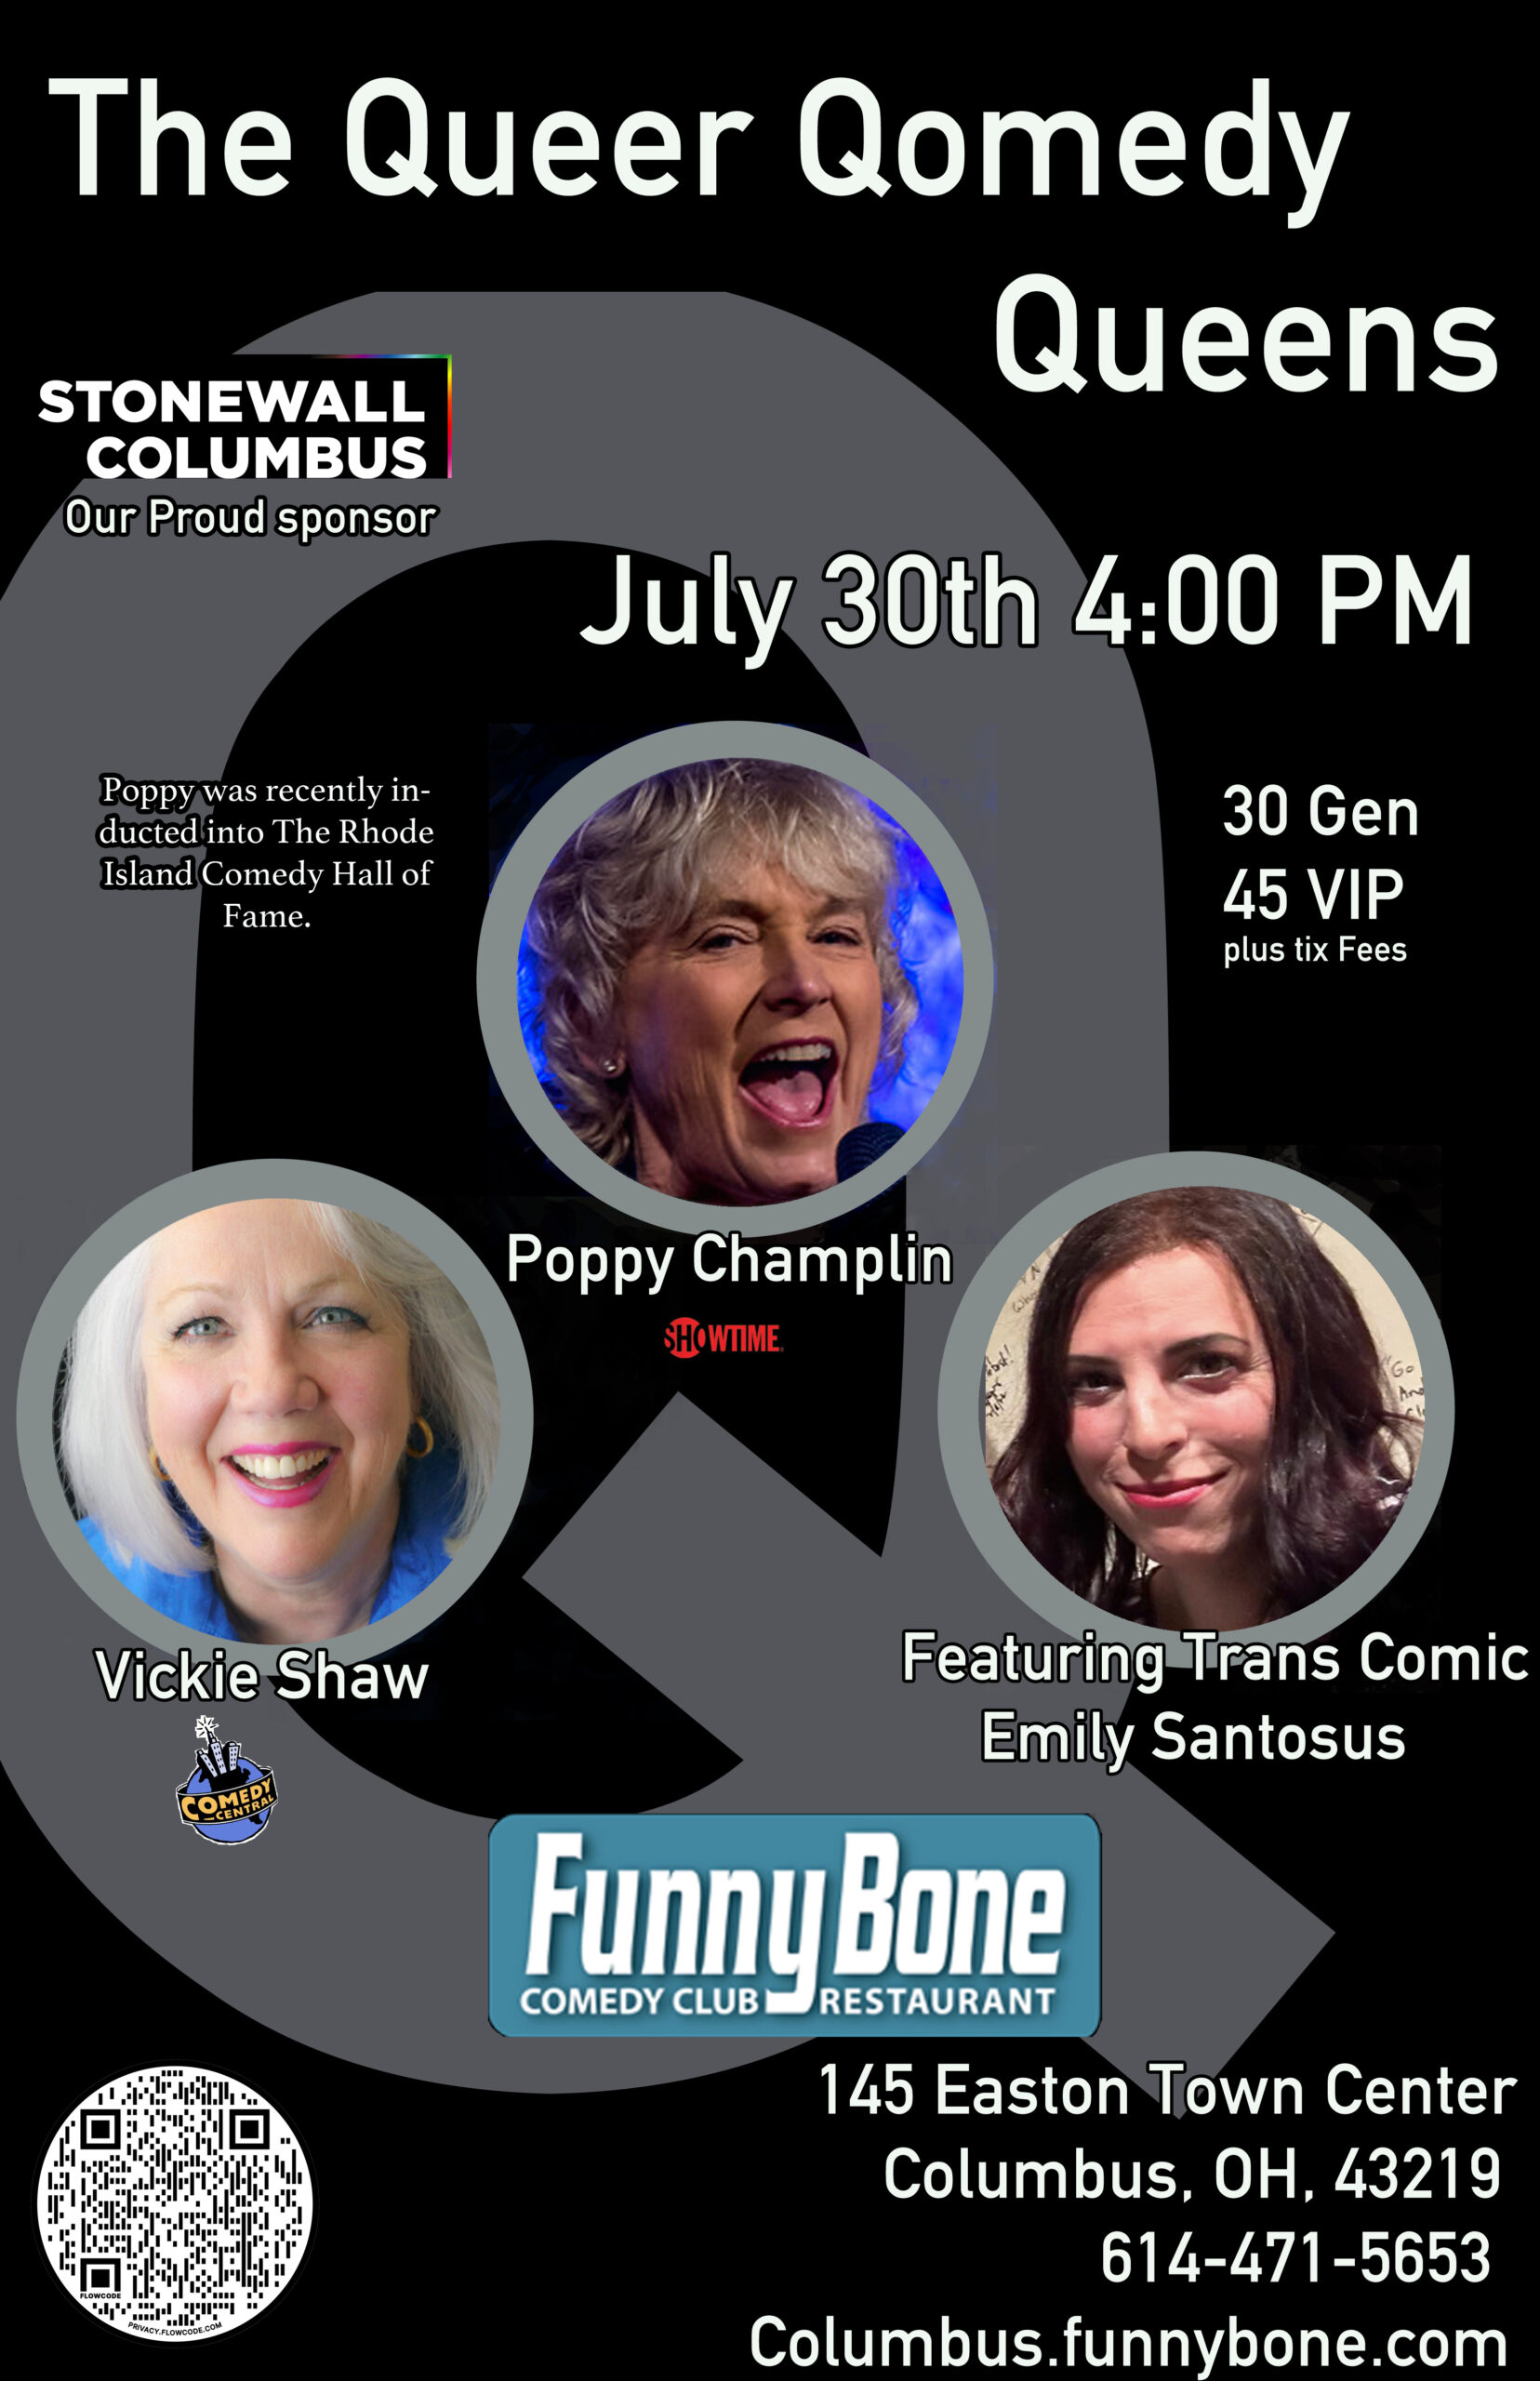 The Queer Qomedy Queens at the Funny Bone! Stonewall Columbus